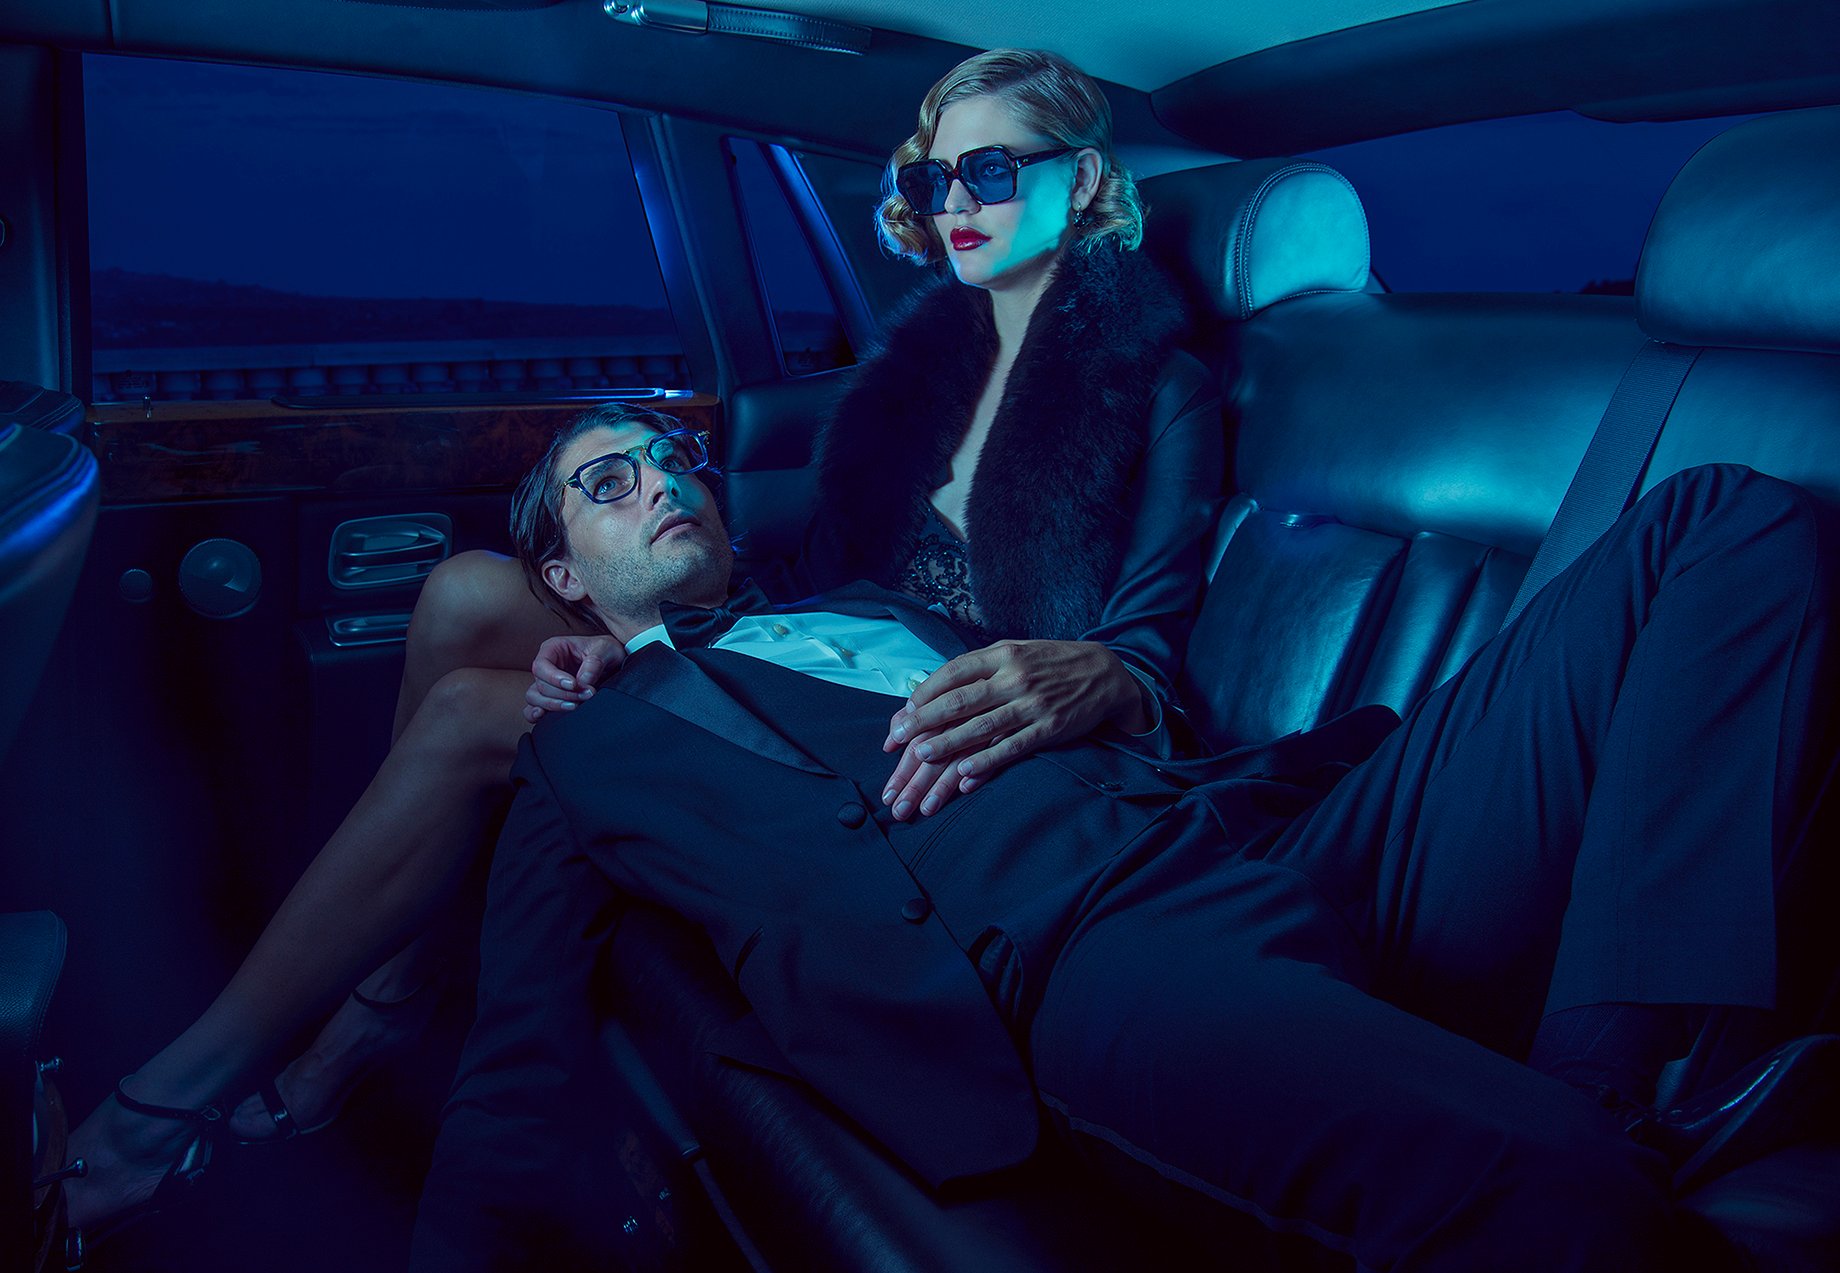 Man in glasses lays on lap of woman with sunglasses in the back of a dark limousine shot by Greg Miles for Dita Eyewear